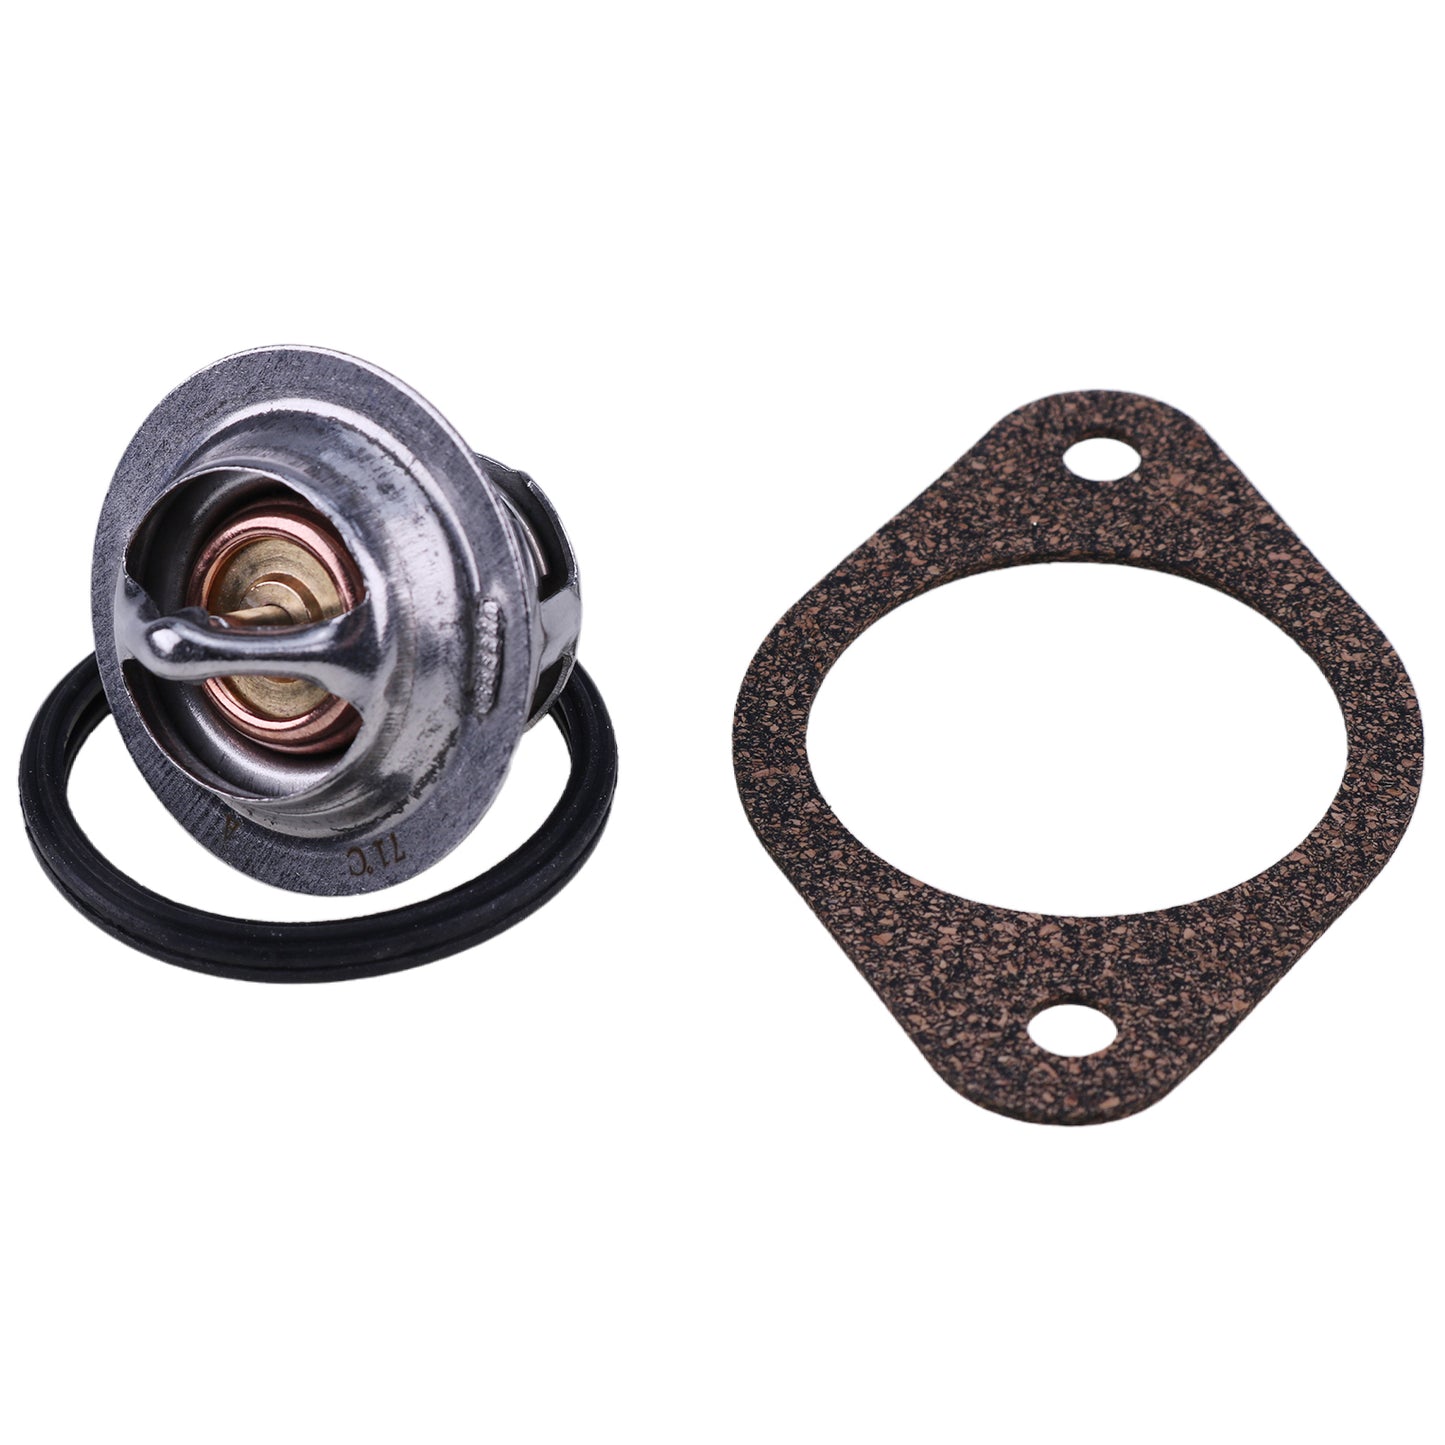 New SBA145206020 Thermostat & Gasket Compatible with Ford New Holland 1720 1920 1320 1520 1620 1715 3415 1510 1710